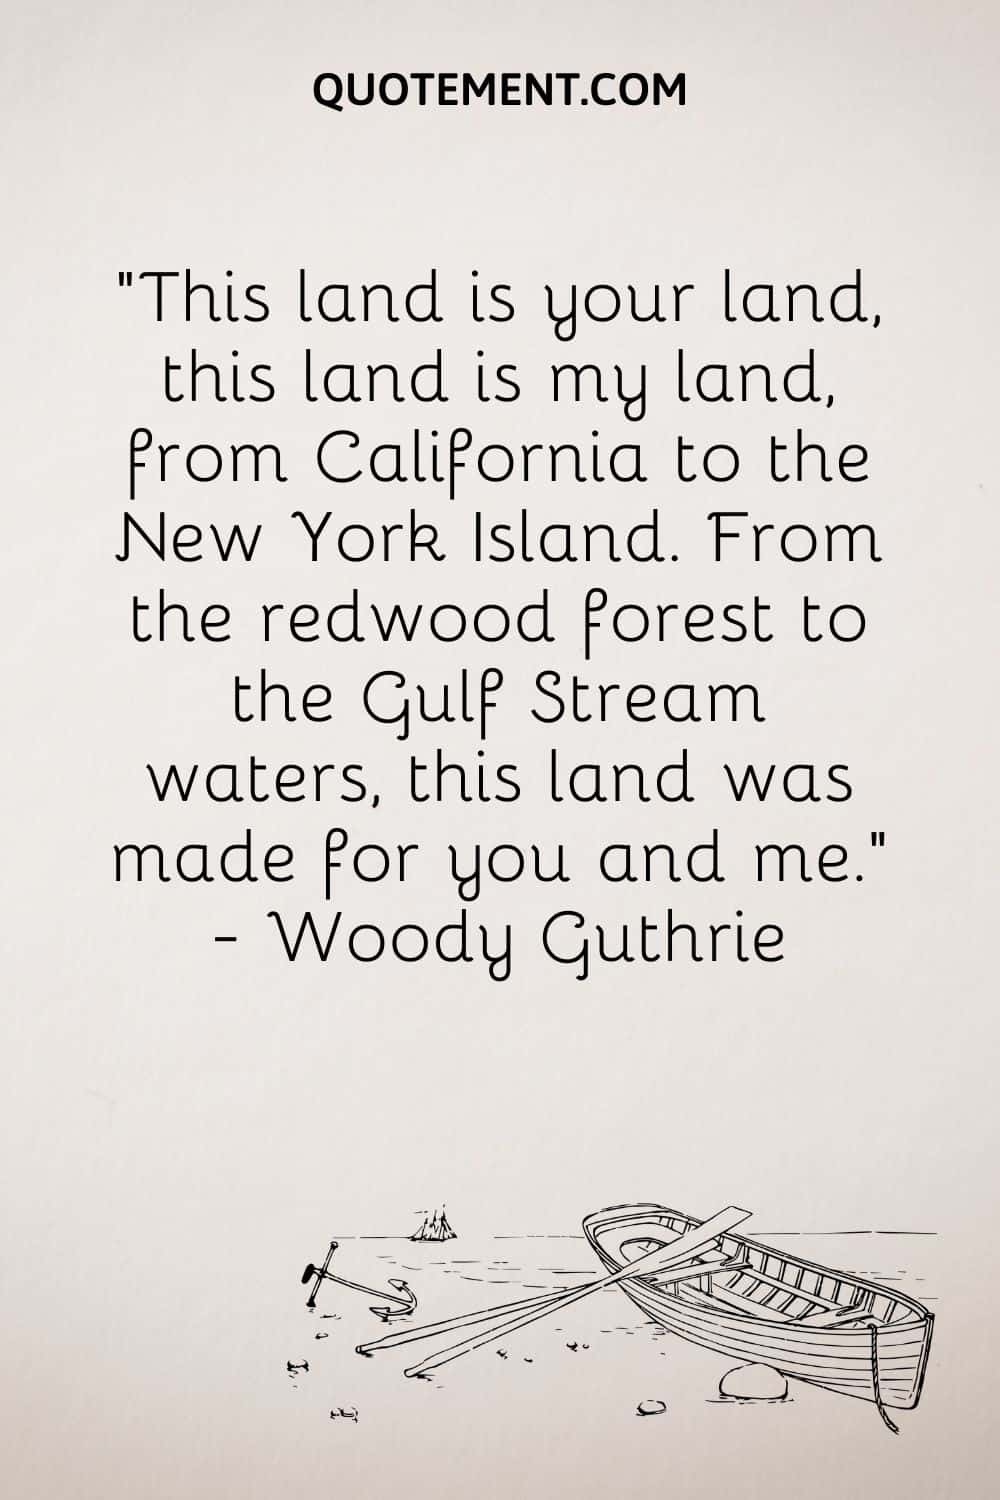 “This land is your land, this land is my land, from California to the New York Island. From the redwood forest to the Gulf Stream waters, this land was made for you and me.” — Woody Guthrie